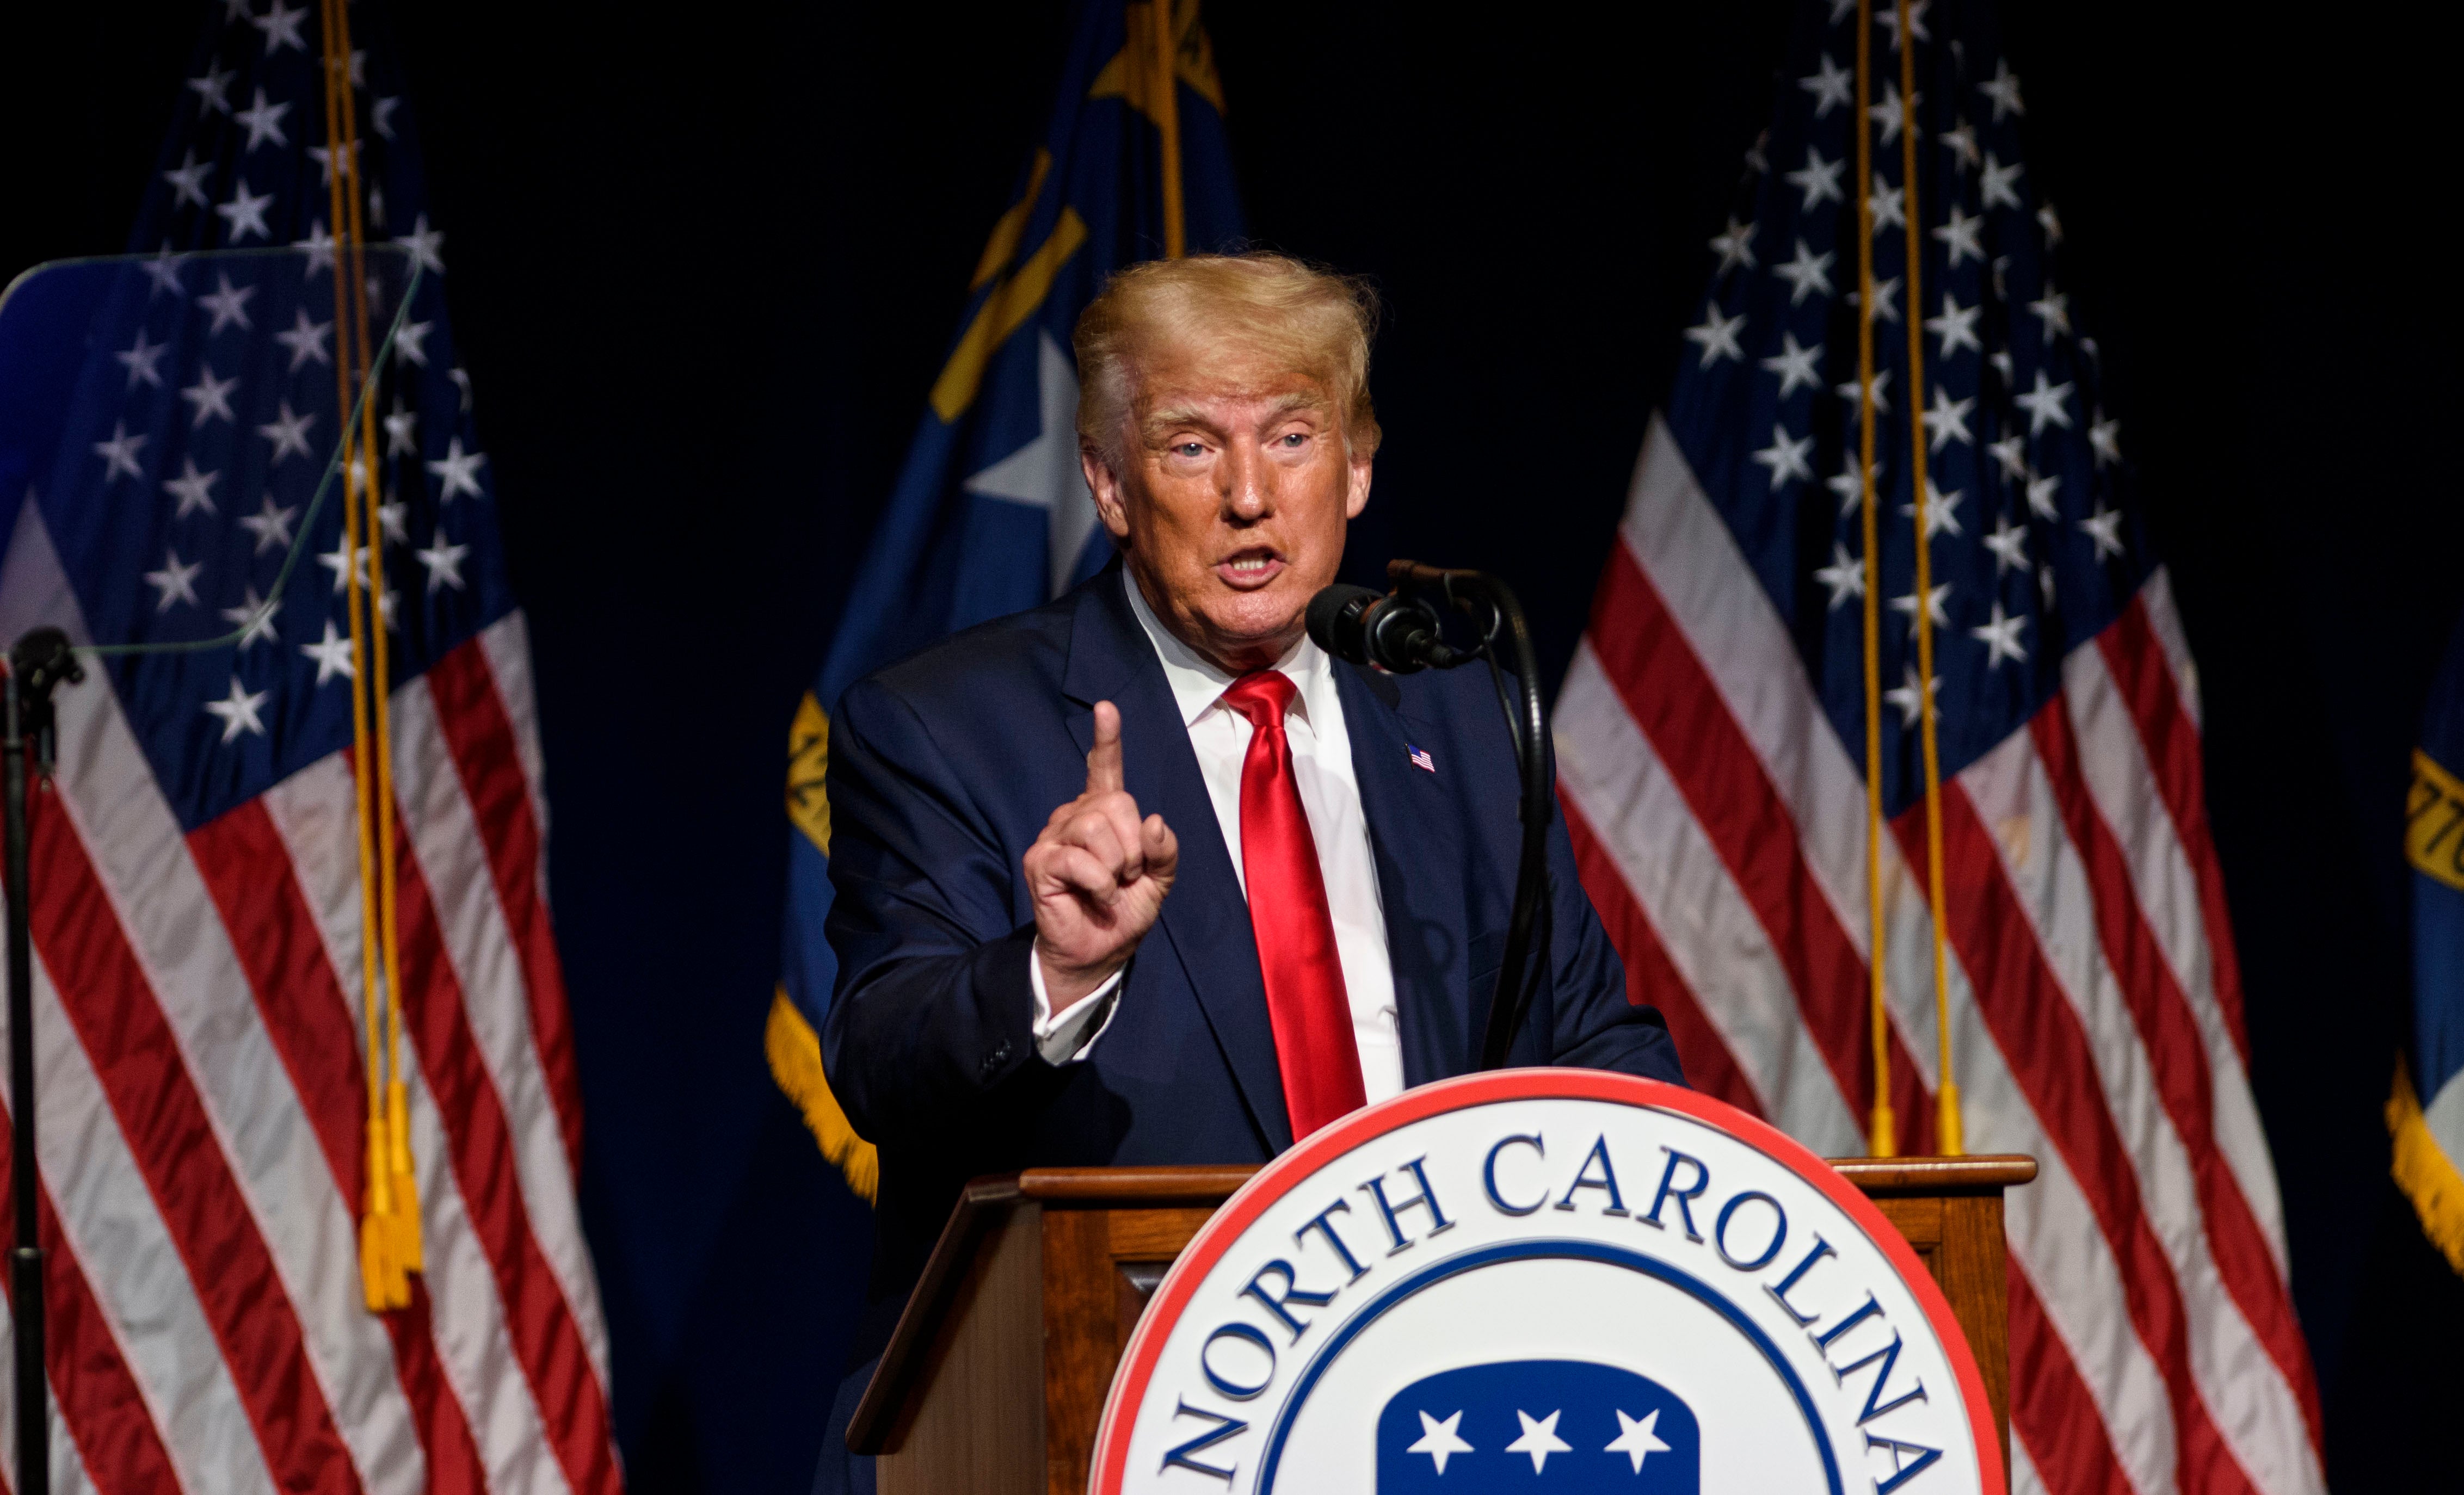 Former US President Donald Trump addresses the NCGOP state convention on June 5, 2021 in Greenville, North Carolina. CNN correspondent Barbara Starr has said a Trump-era Justice Department decision to seize her records was a ‘sheer abuse of power’.